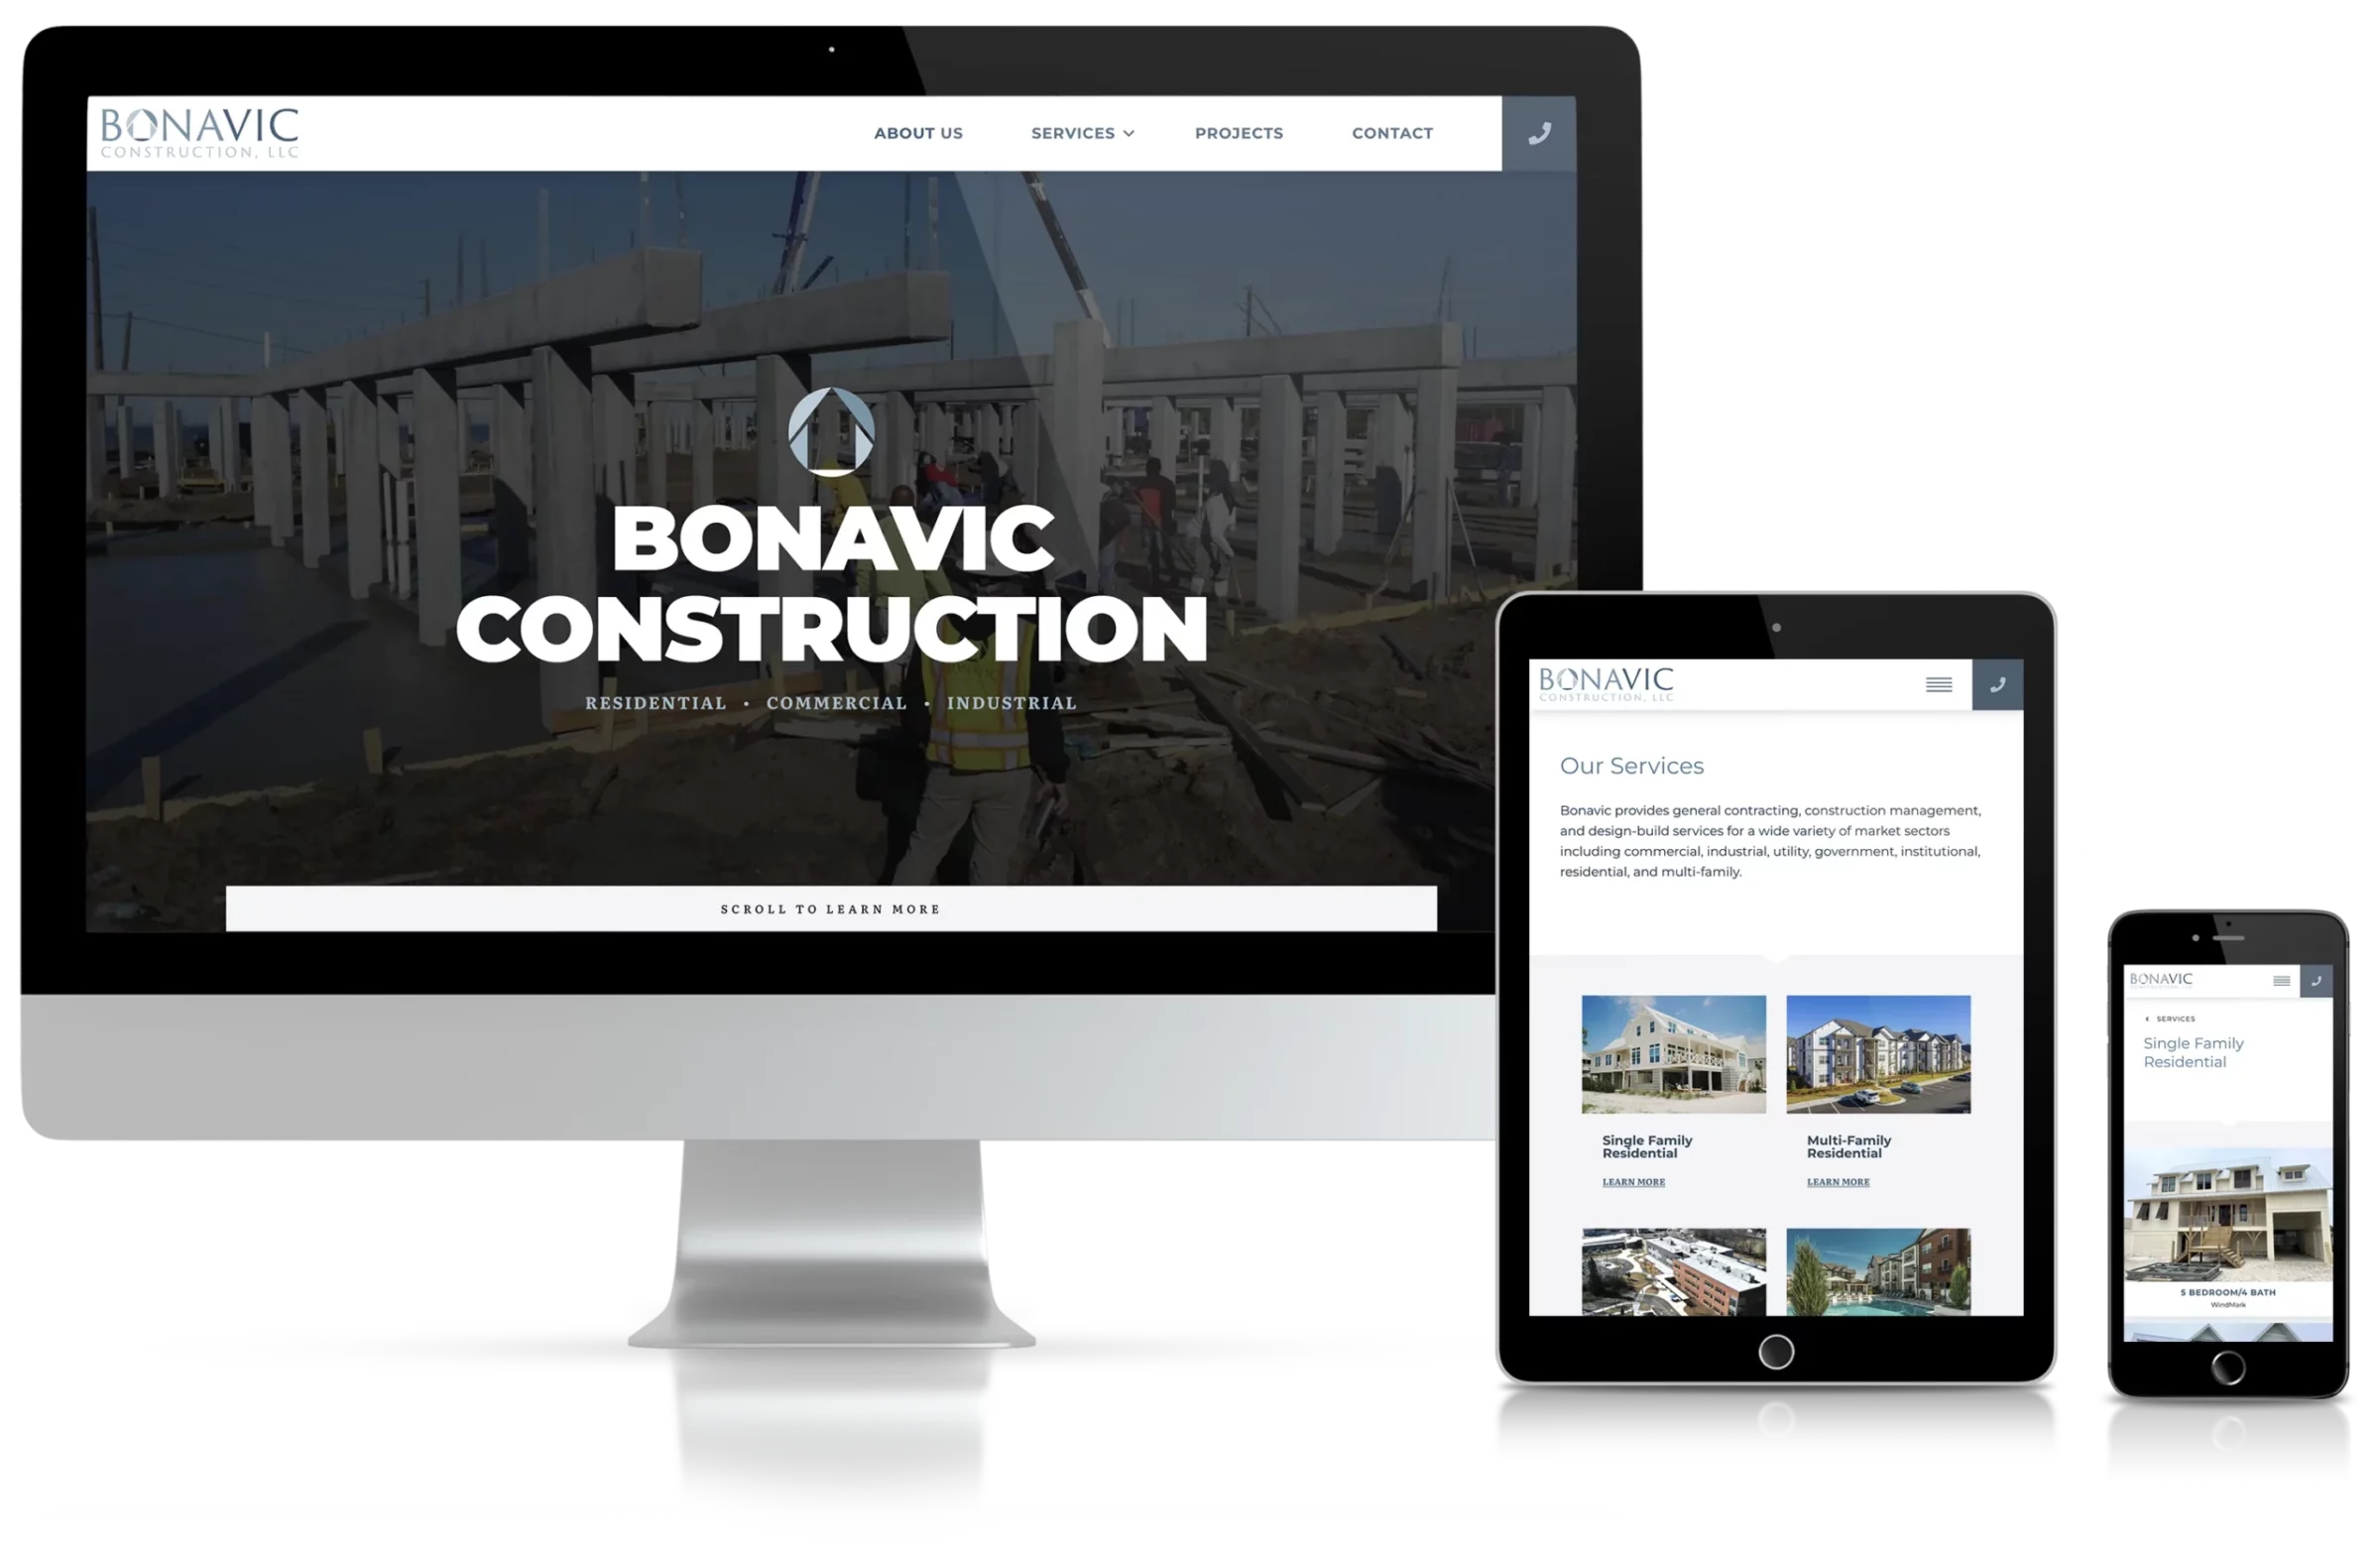 Computer screen, tablet screen, and phone screen showing Bonavic Construction's website.